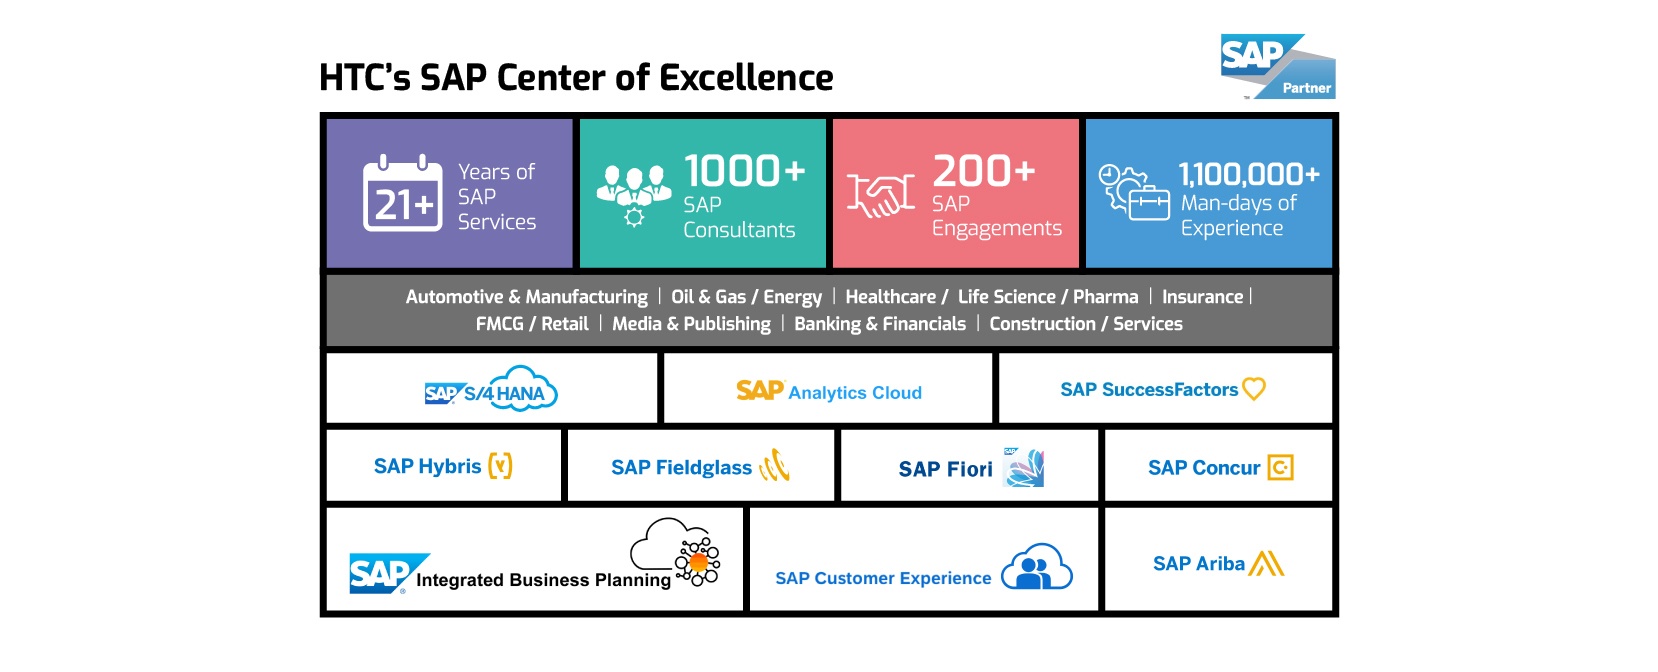 HTC's SAP Center of Excellence